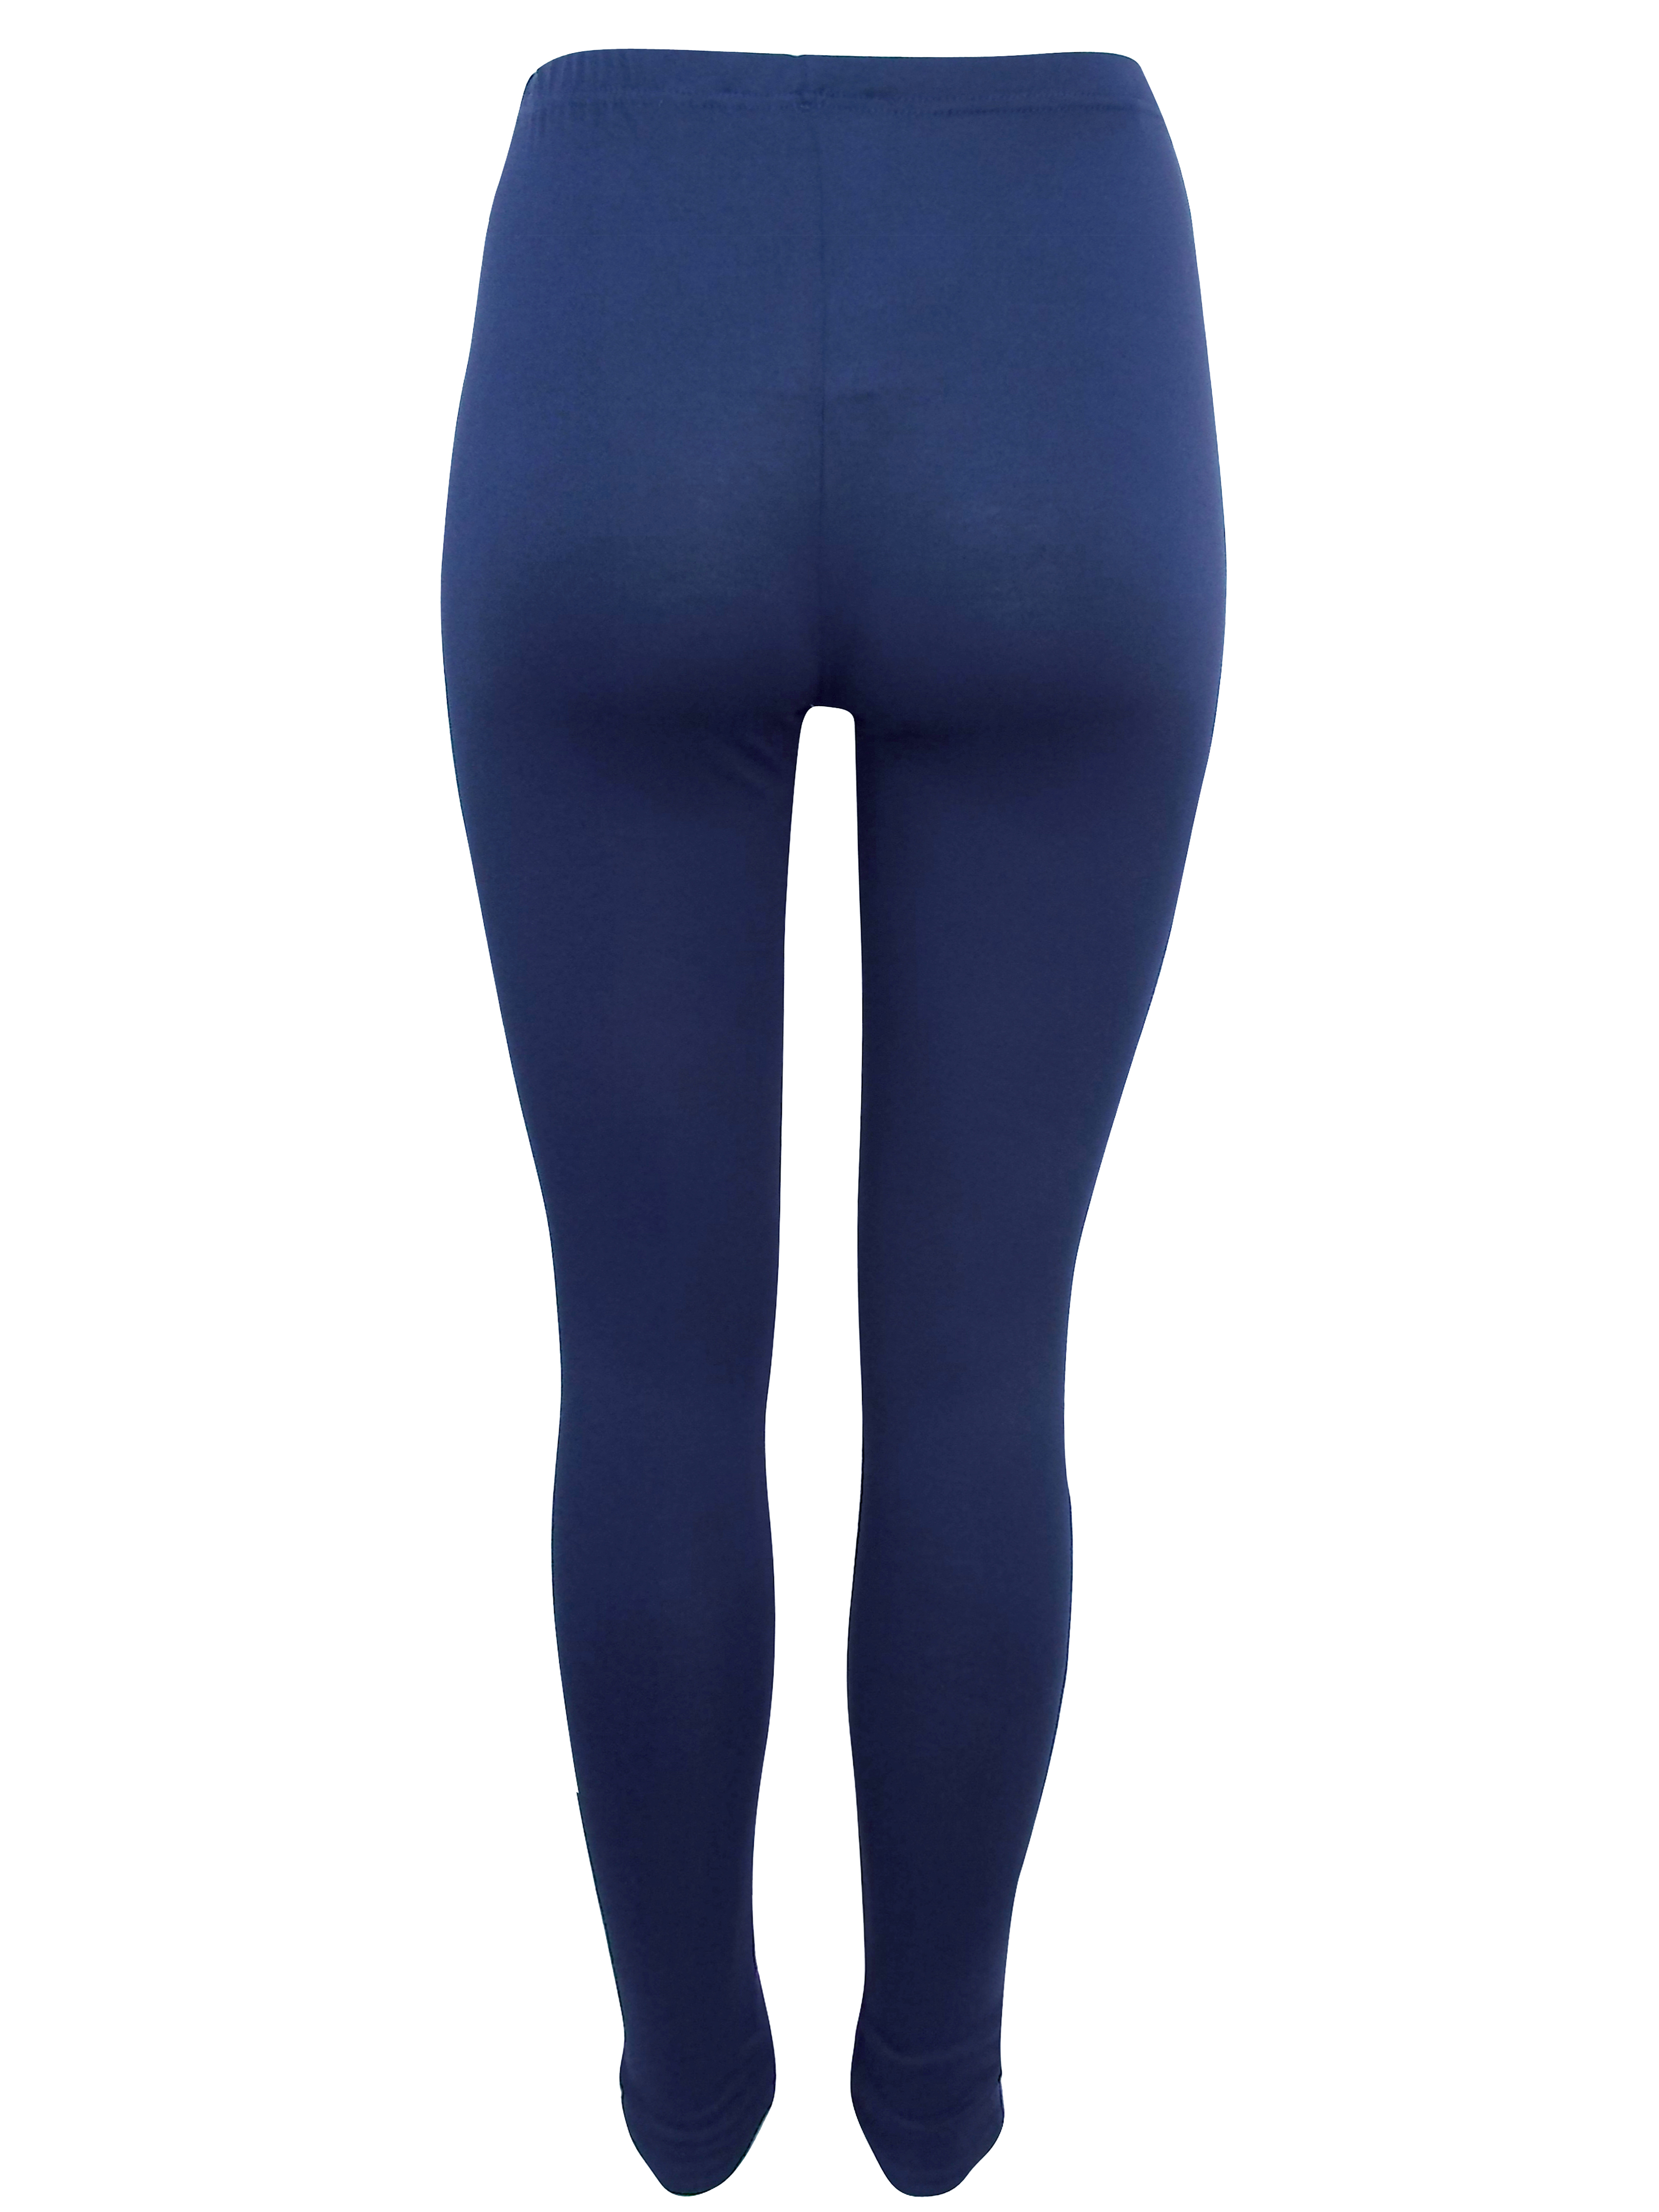 //text.. - - NAVY Full Length Jersey Leggings - Size 10 to 20